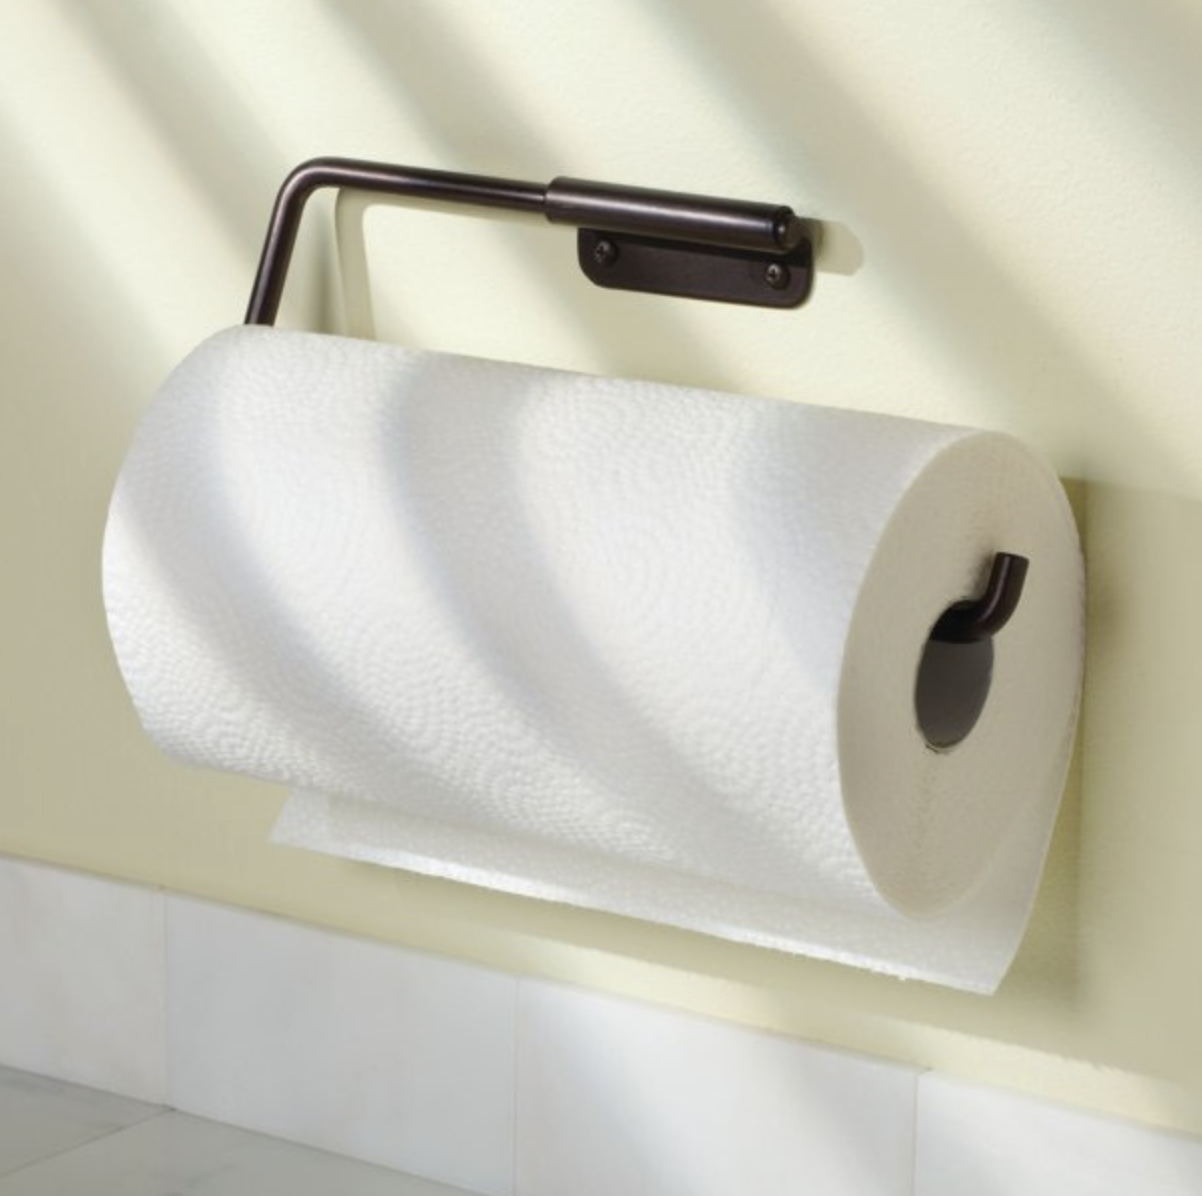 The 5 Main Types of Paper Towel Holder, Ranked